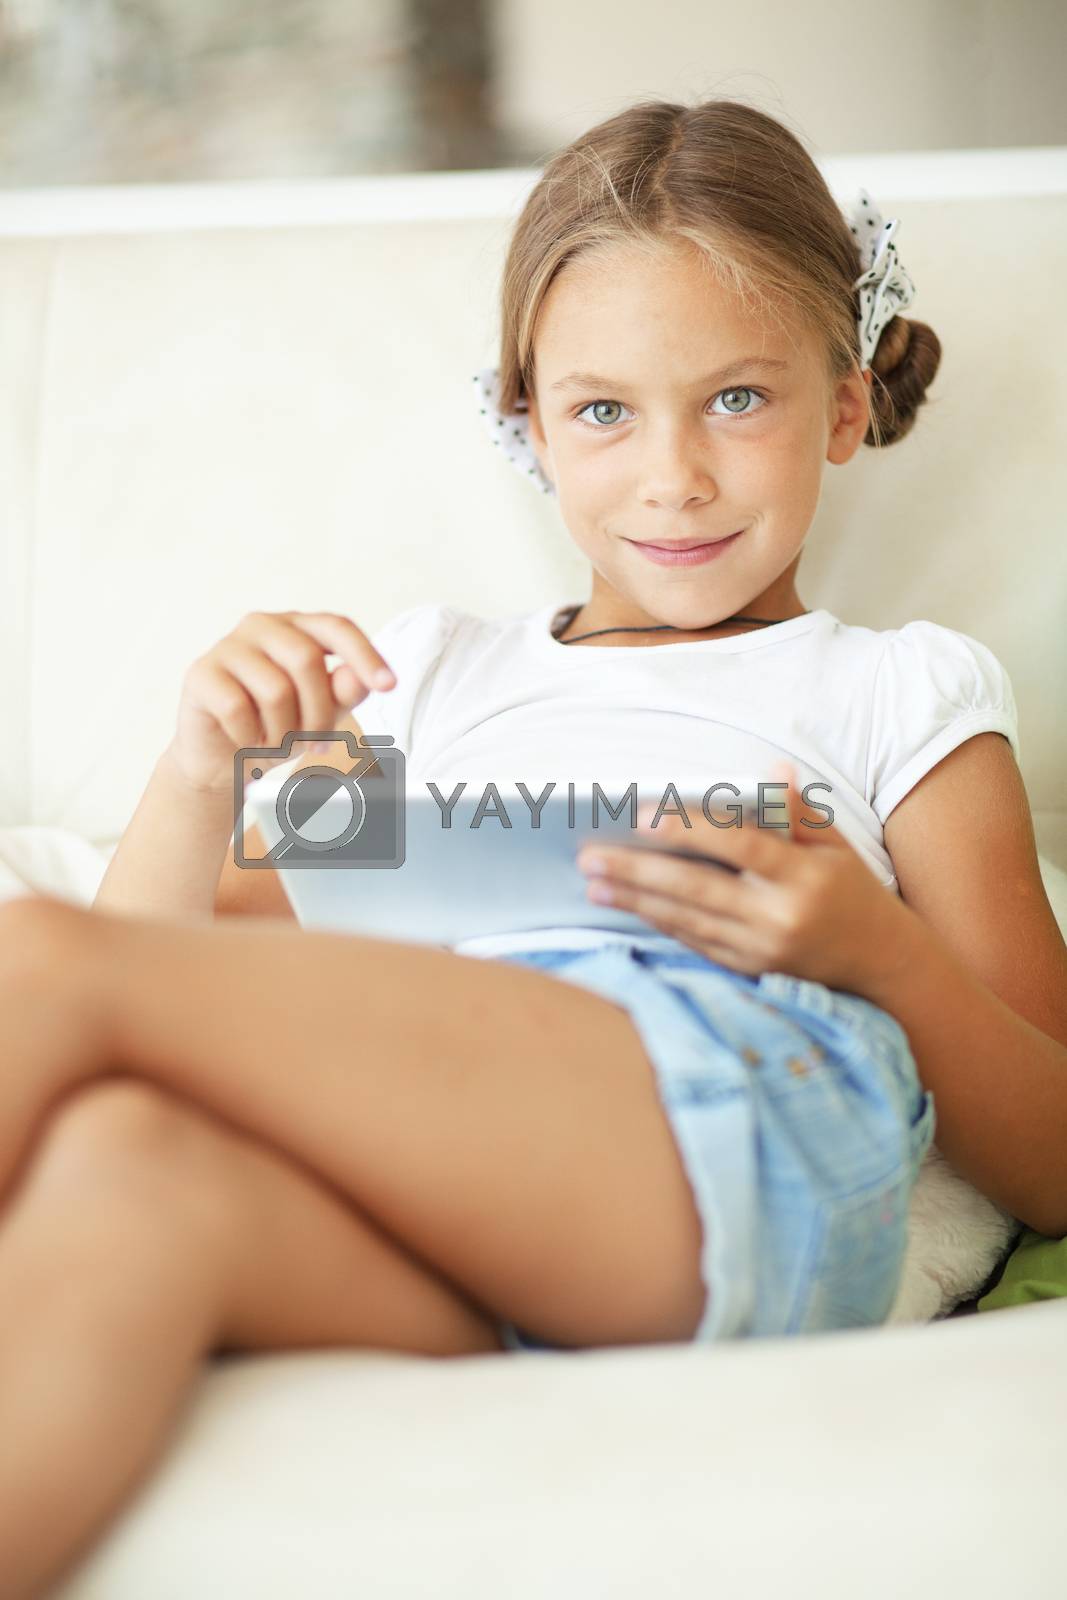 Royalty free image of Child playing on tablet pc by alenkasm